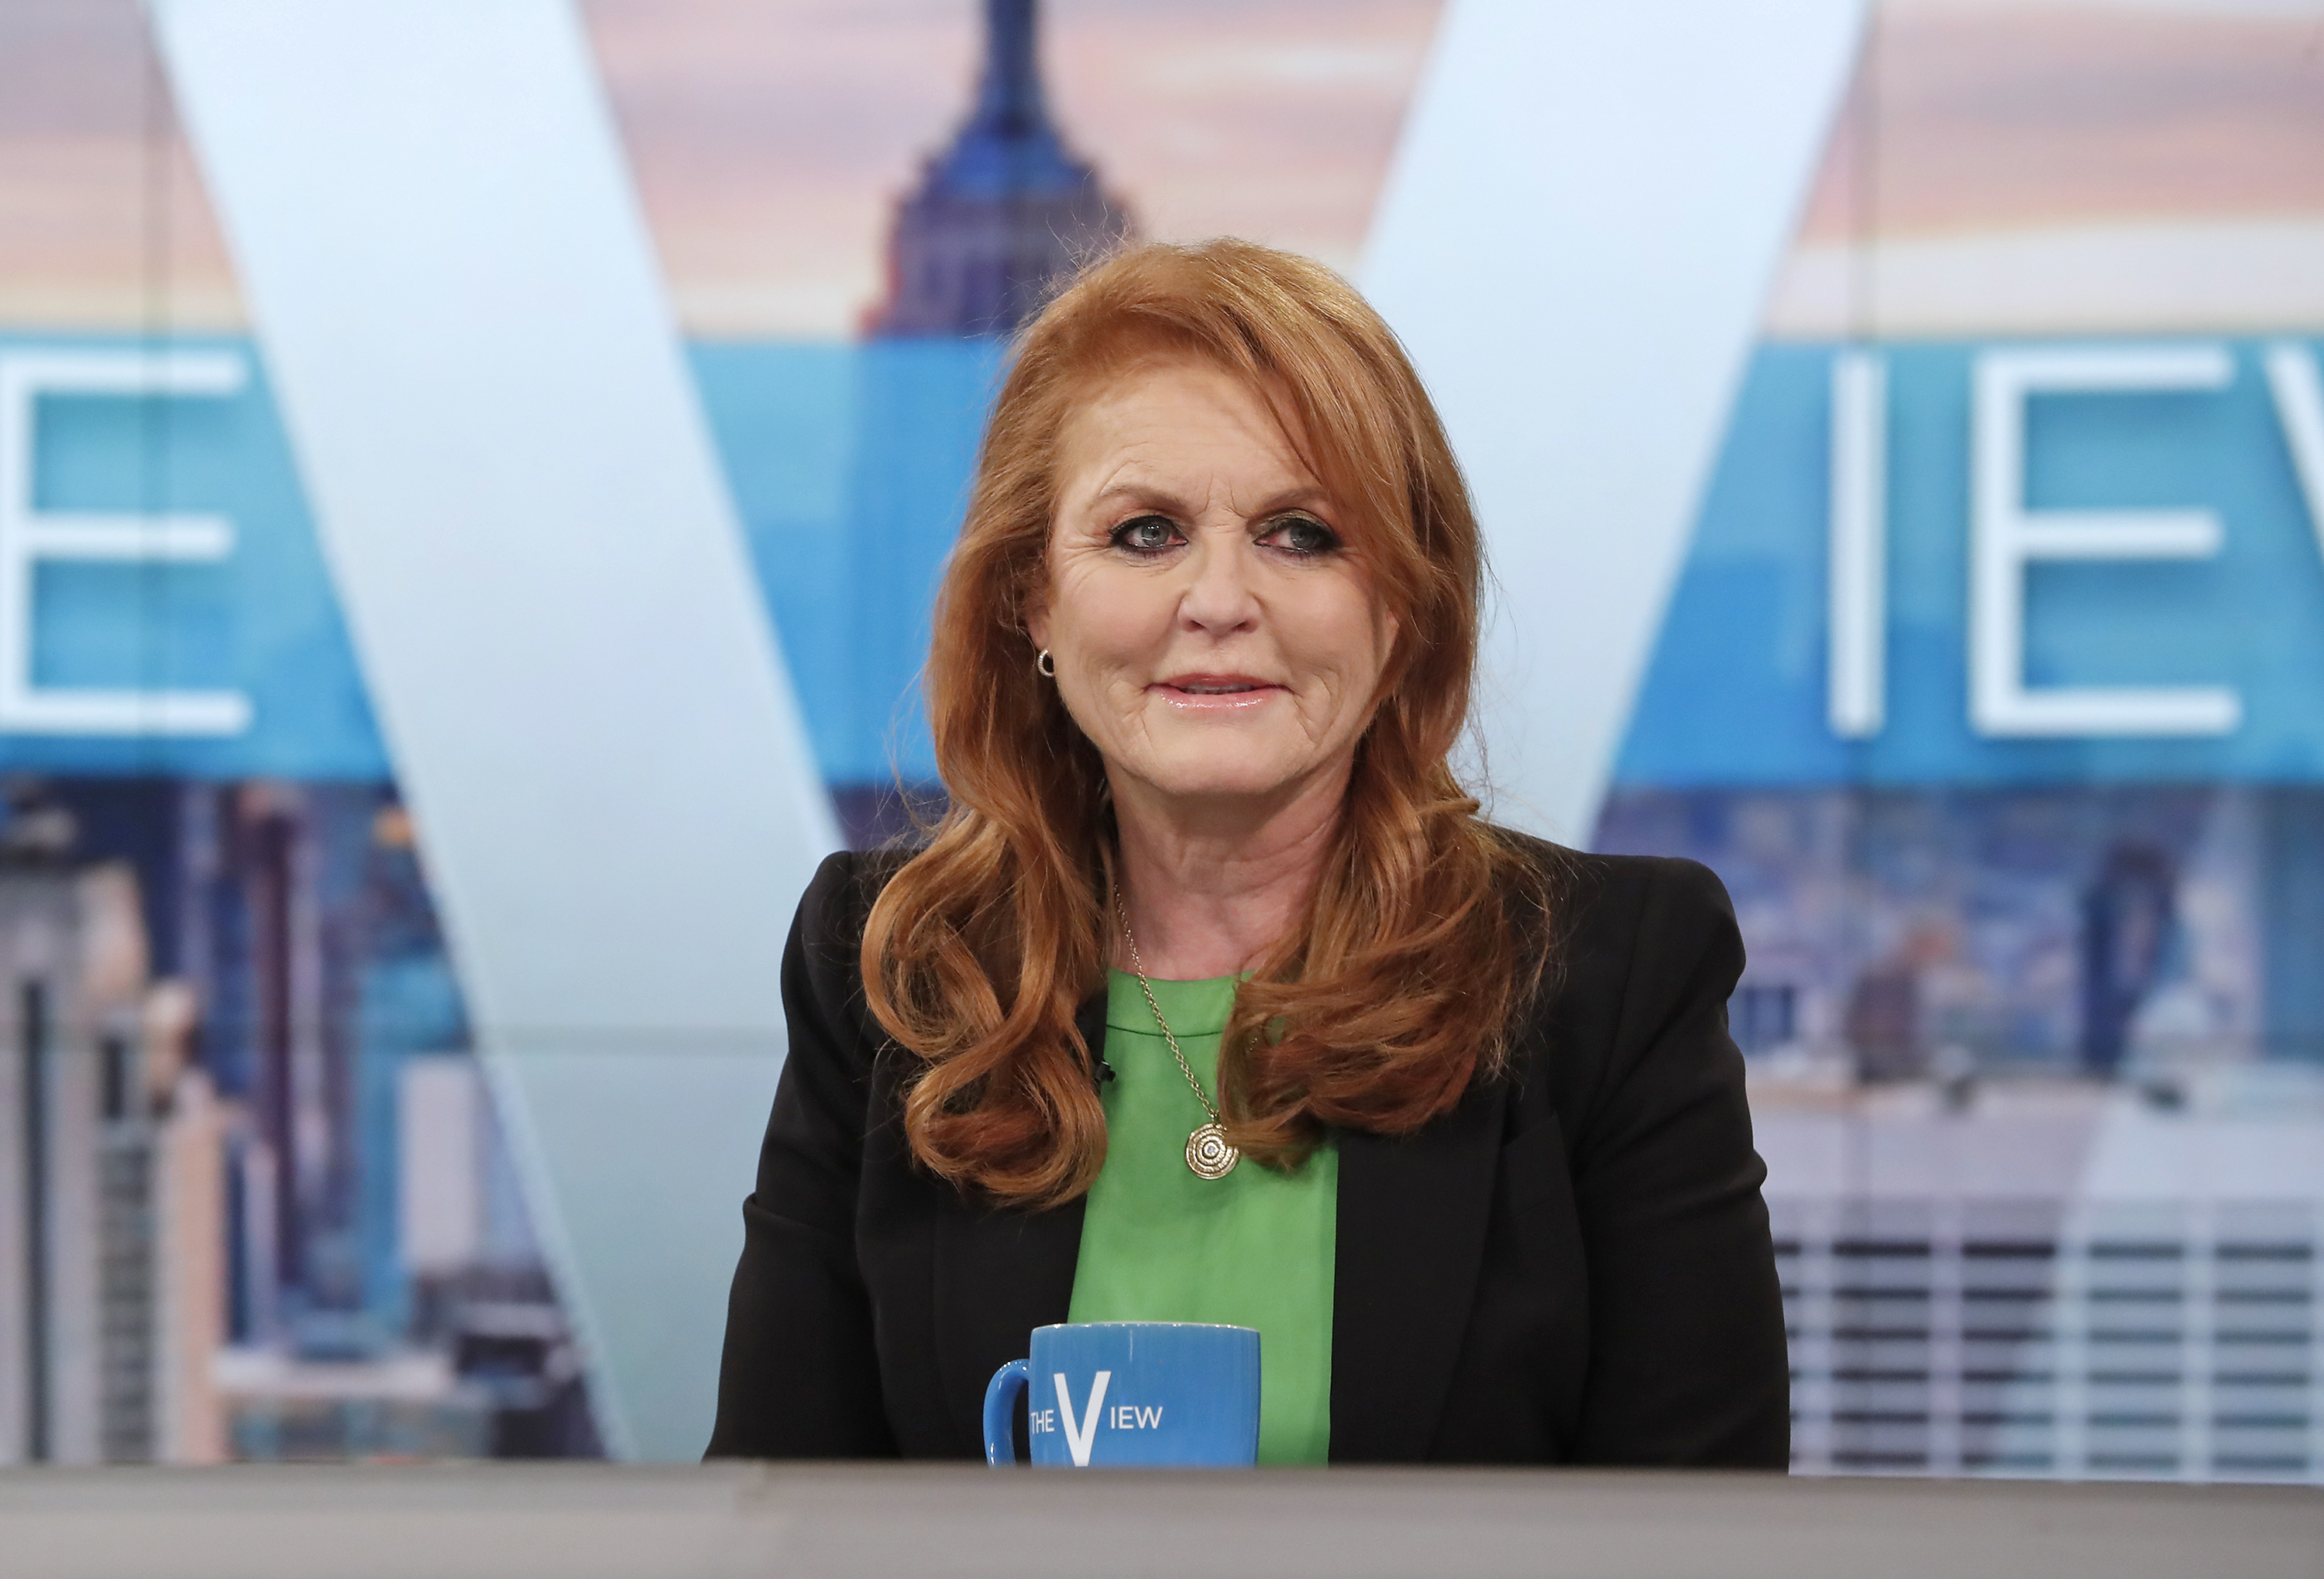 Sarah Ferguson, The Duchess of York, on "The View" on March 3, 2023 | Source: Getty Images